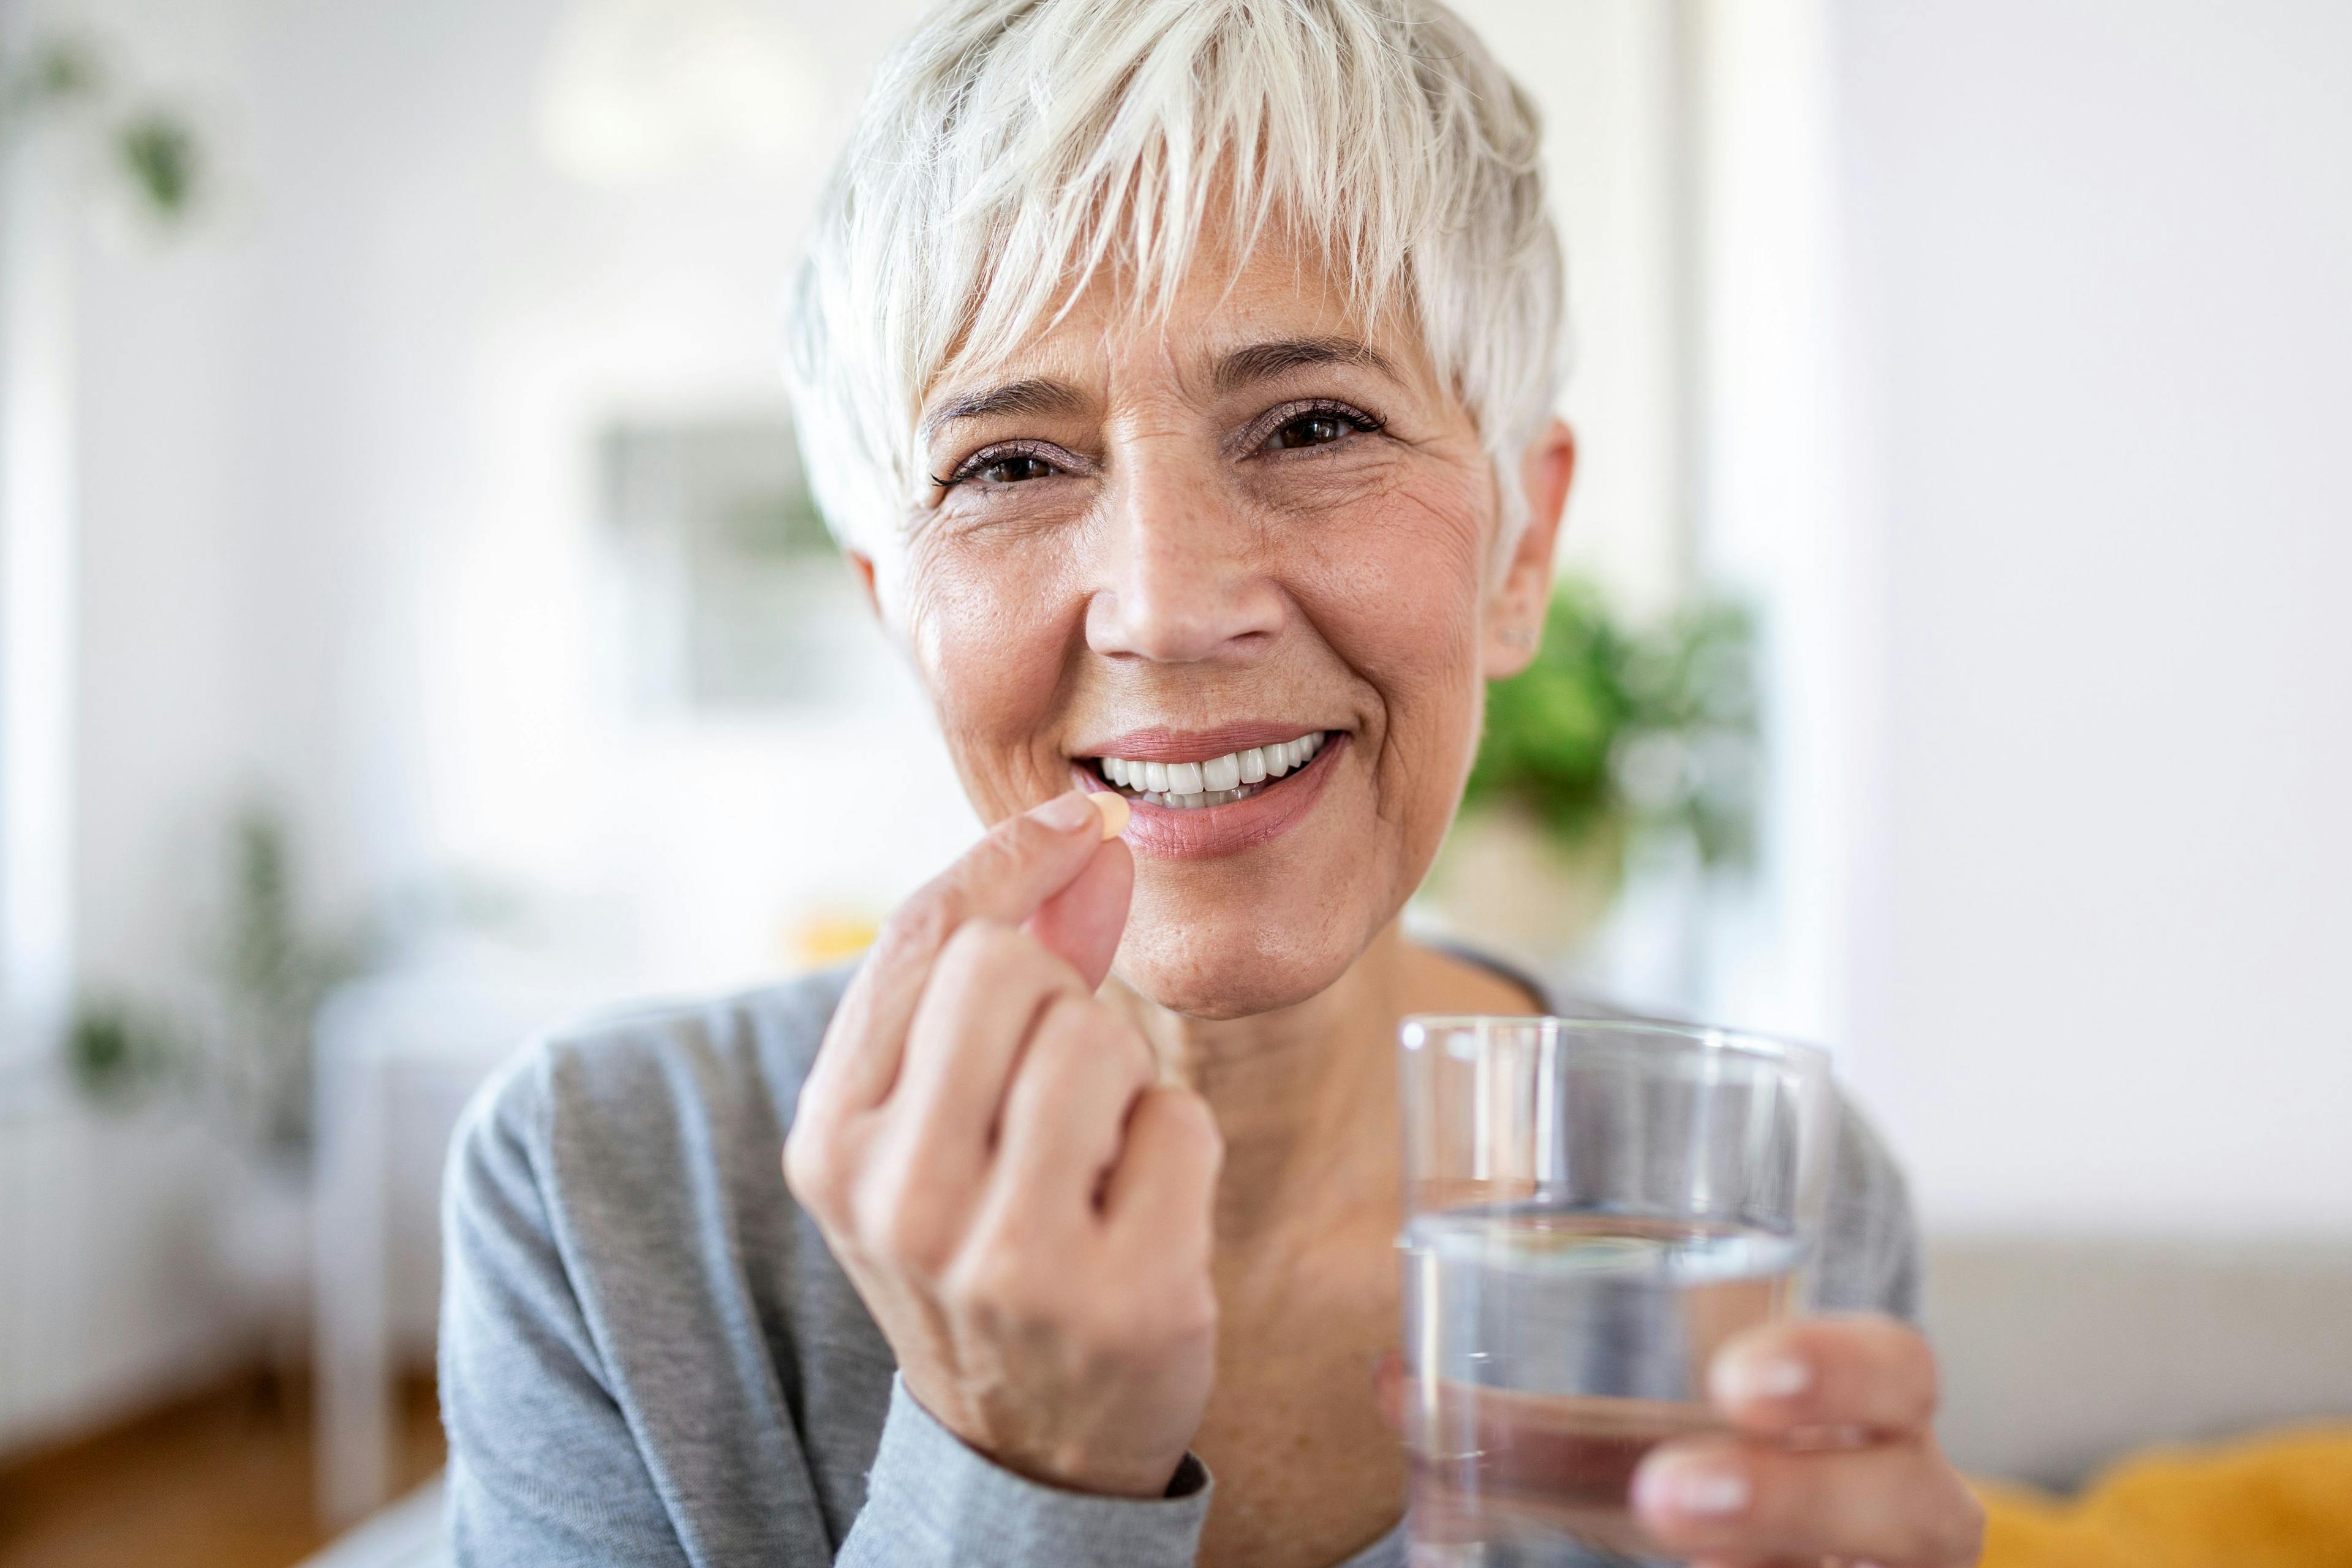 Hormone therapy safety: Study finds potential benefits for senior women | Image Credit: © Graphicroyalty - © Graphicroyalty - stock.adobe.com.